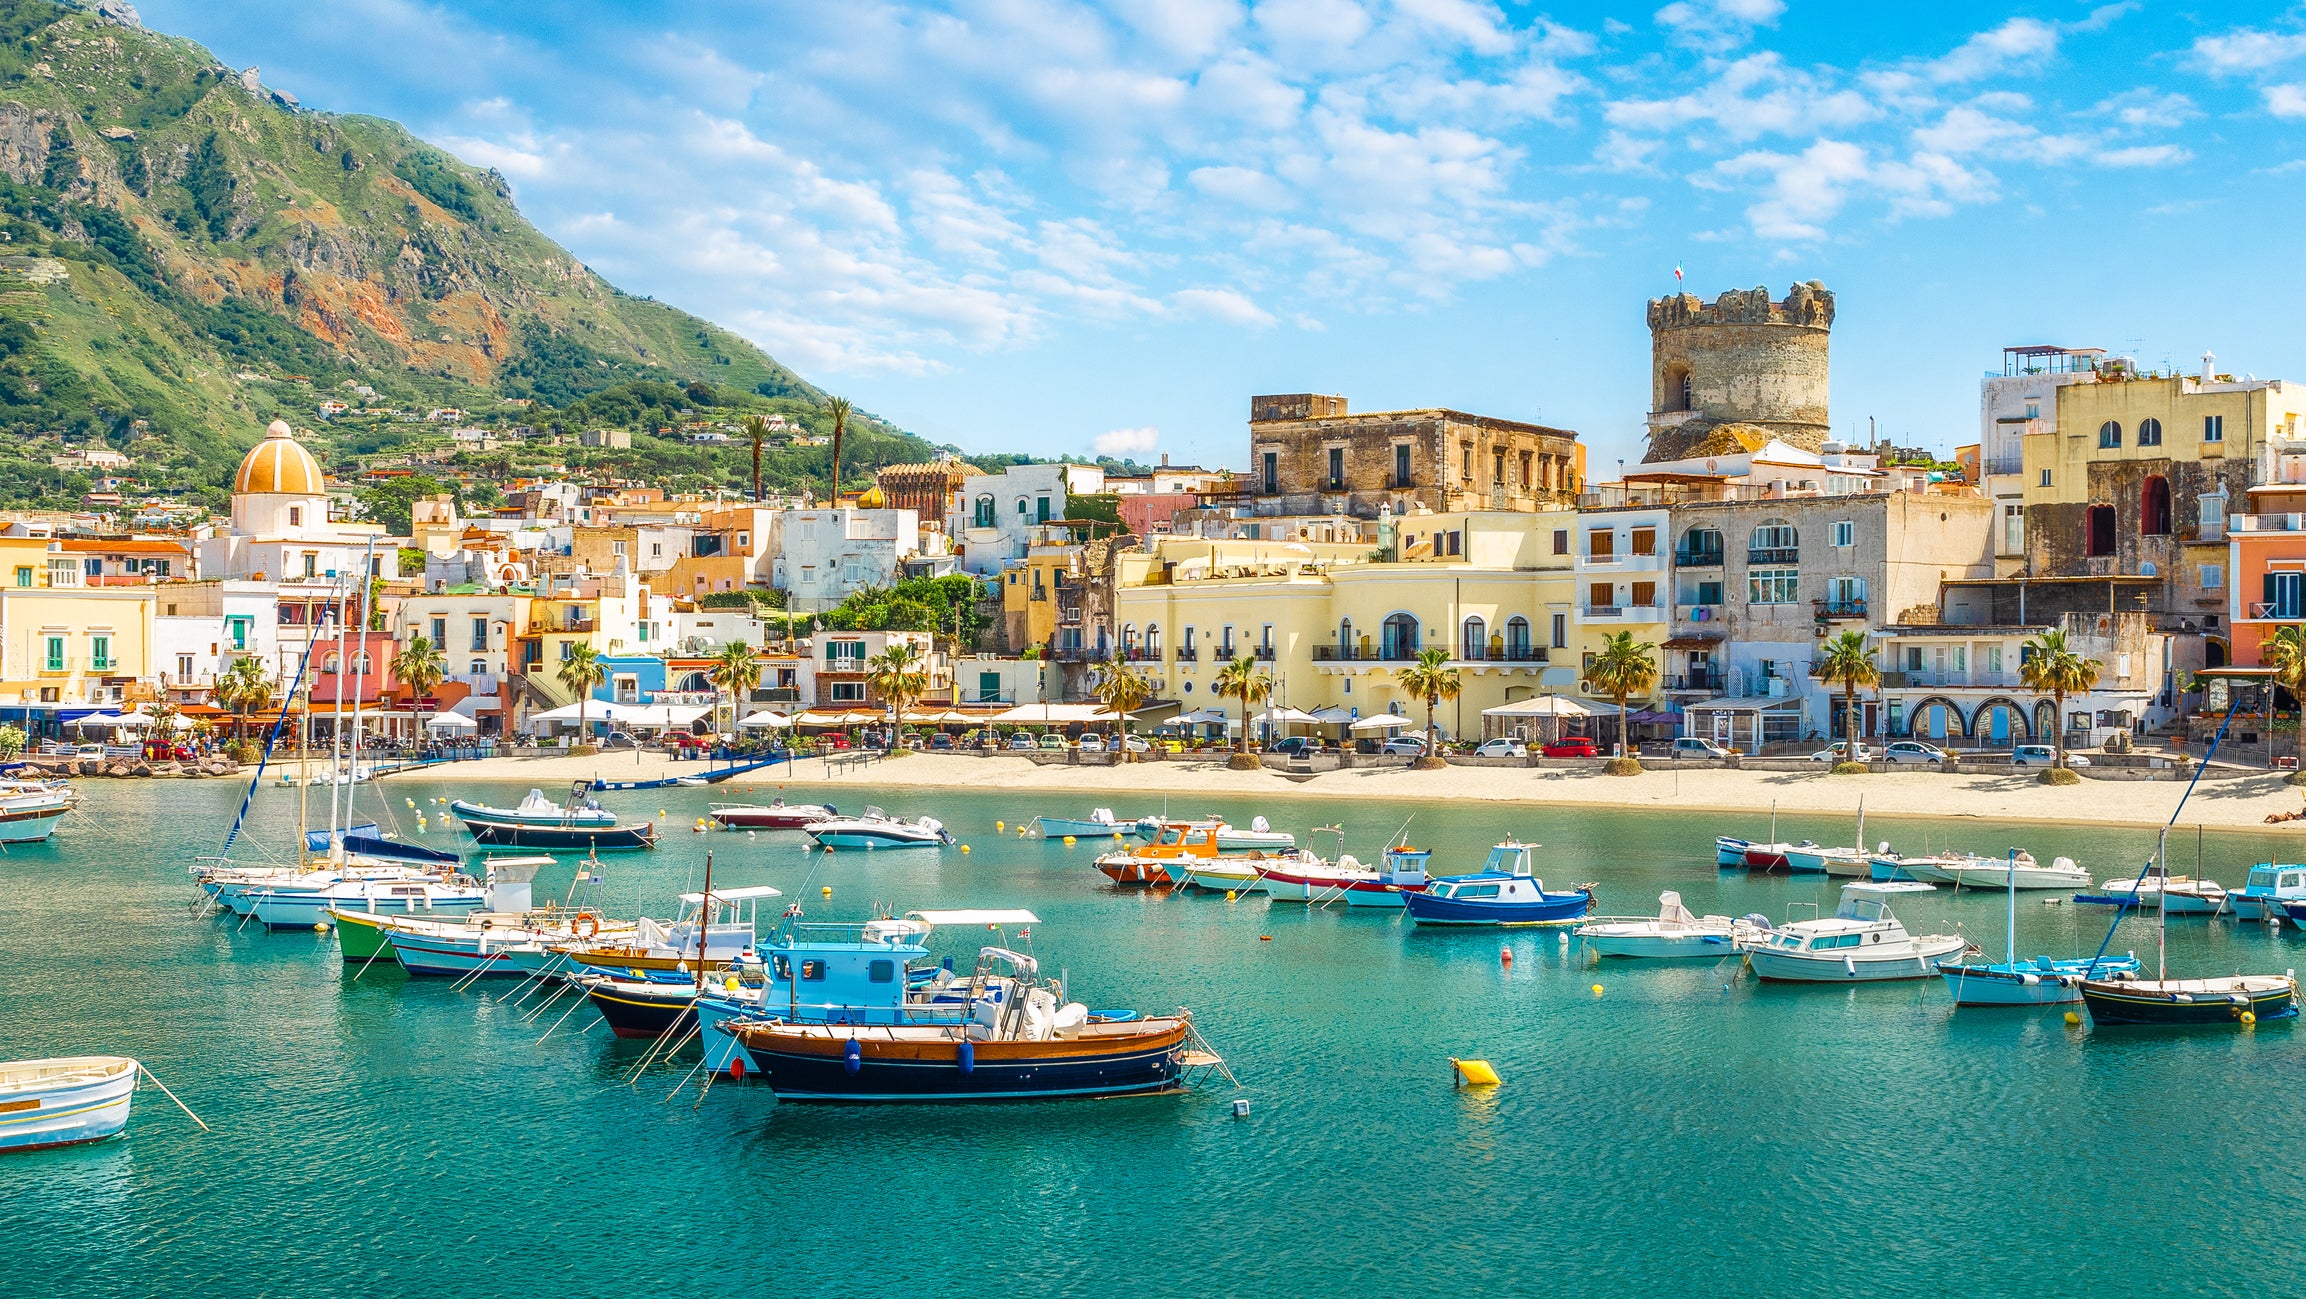 May is ideal for exploring Ischia’s rugged interior on foot